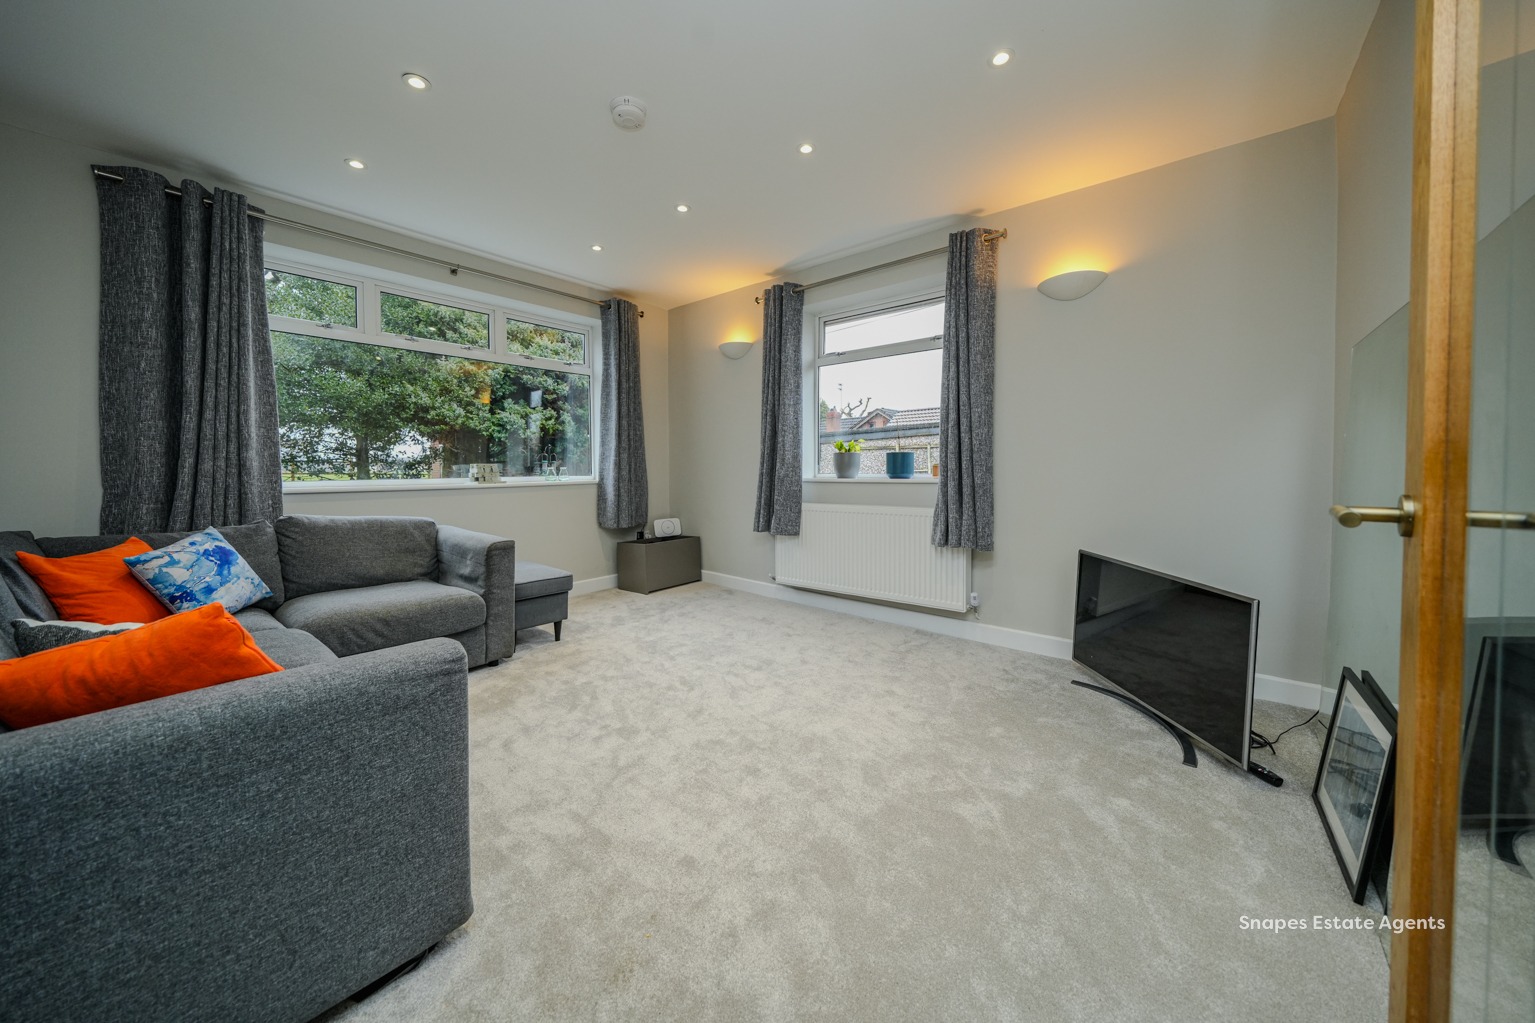 Images for Bridle Road, Woodford, Cheshire SK7 1QH